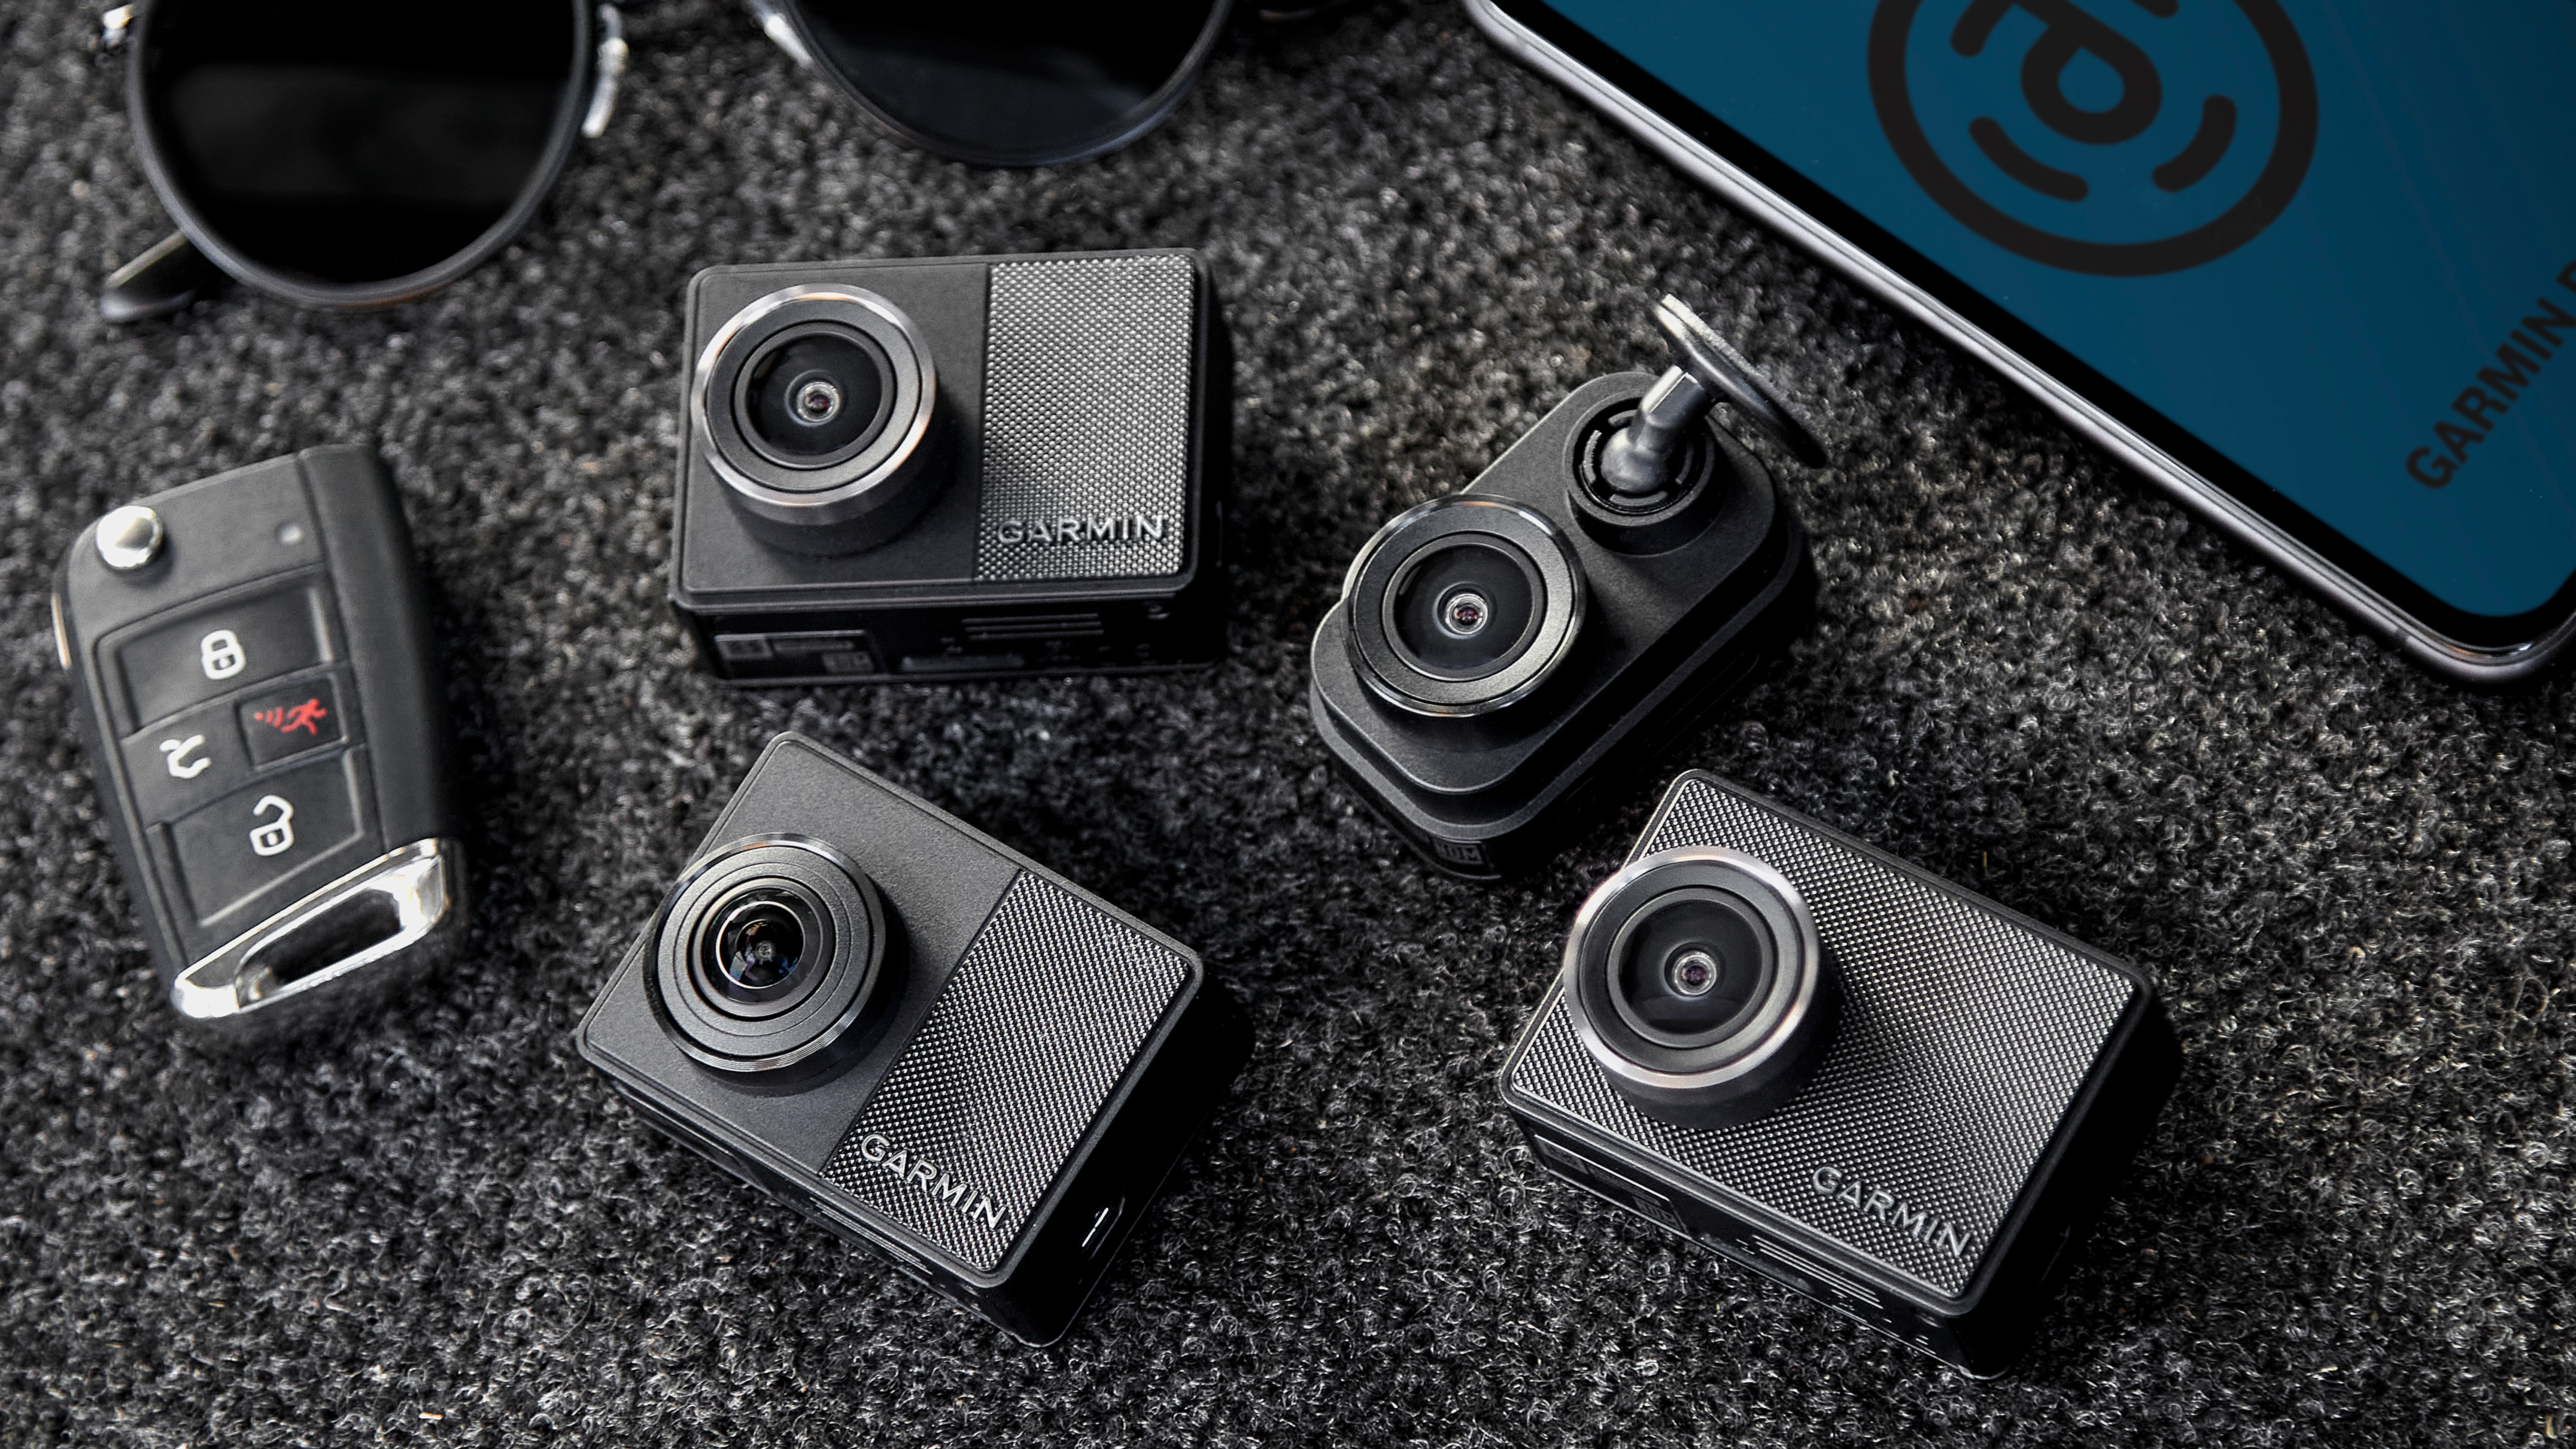 Stay alert with Garmin's first connected dash cam series